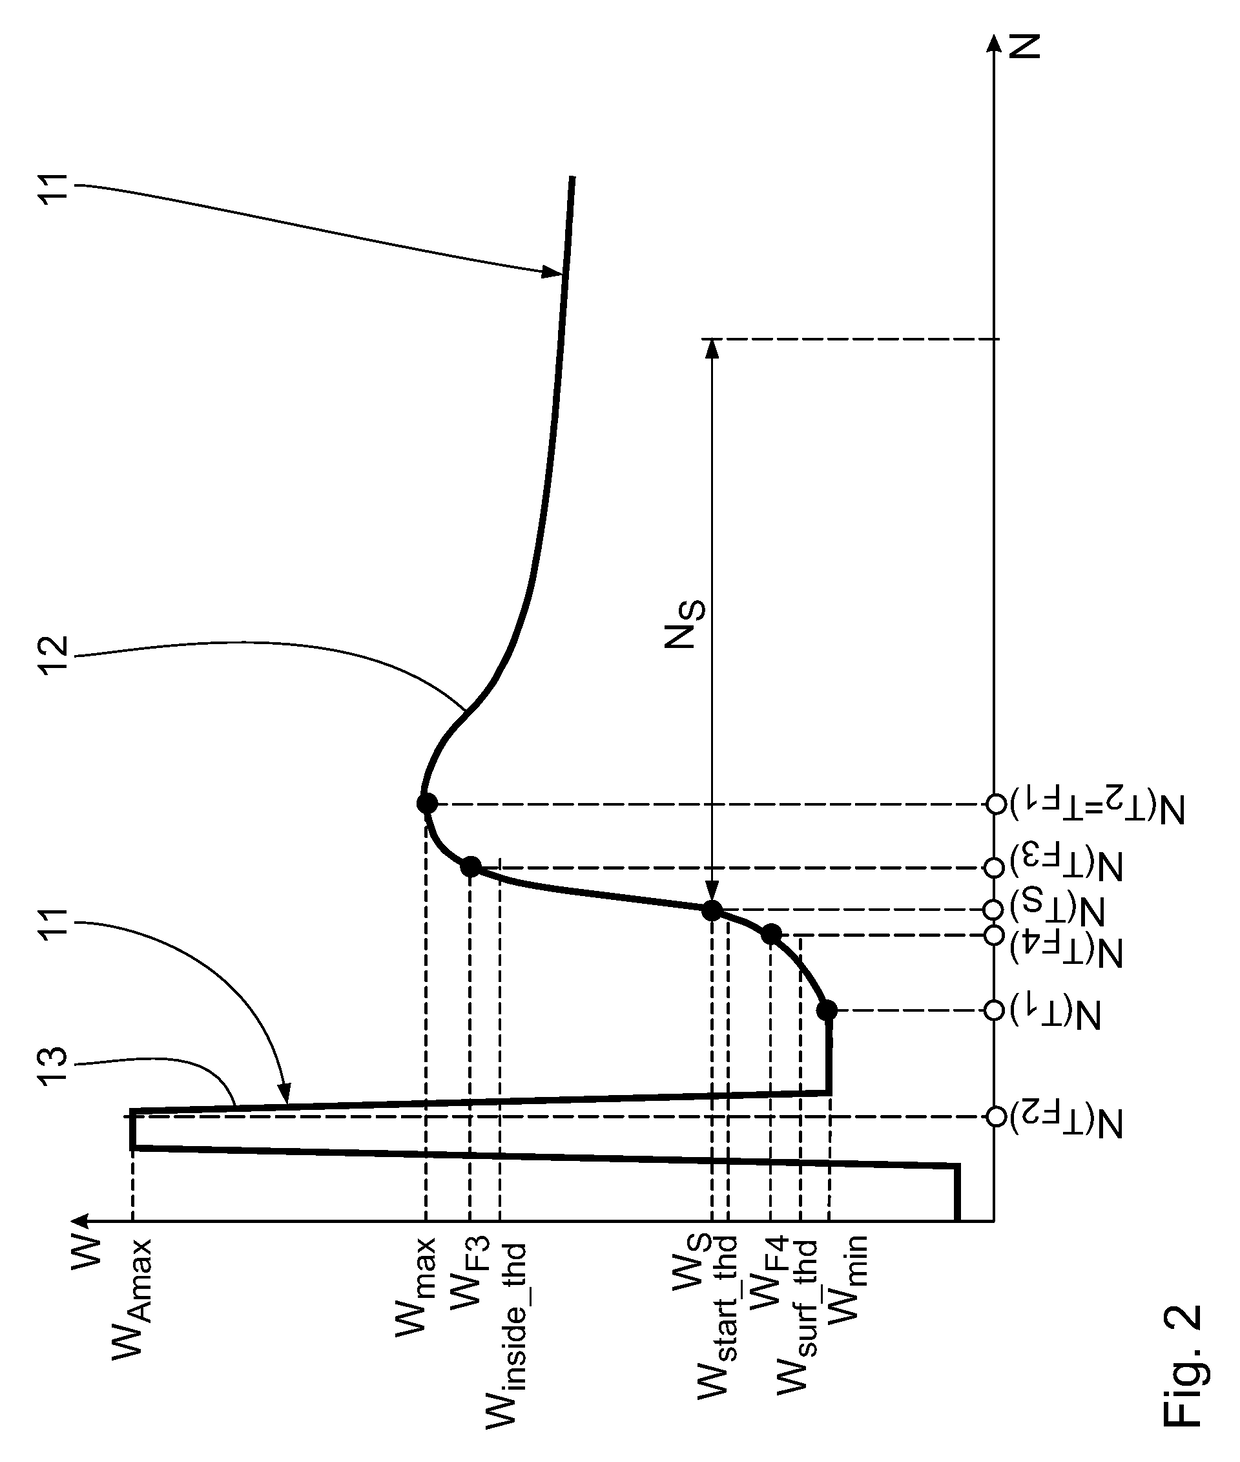 Method for the automatic inspection of a welding seam by means of heat flow thermography